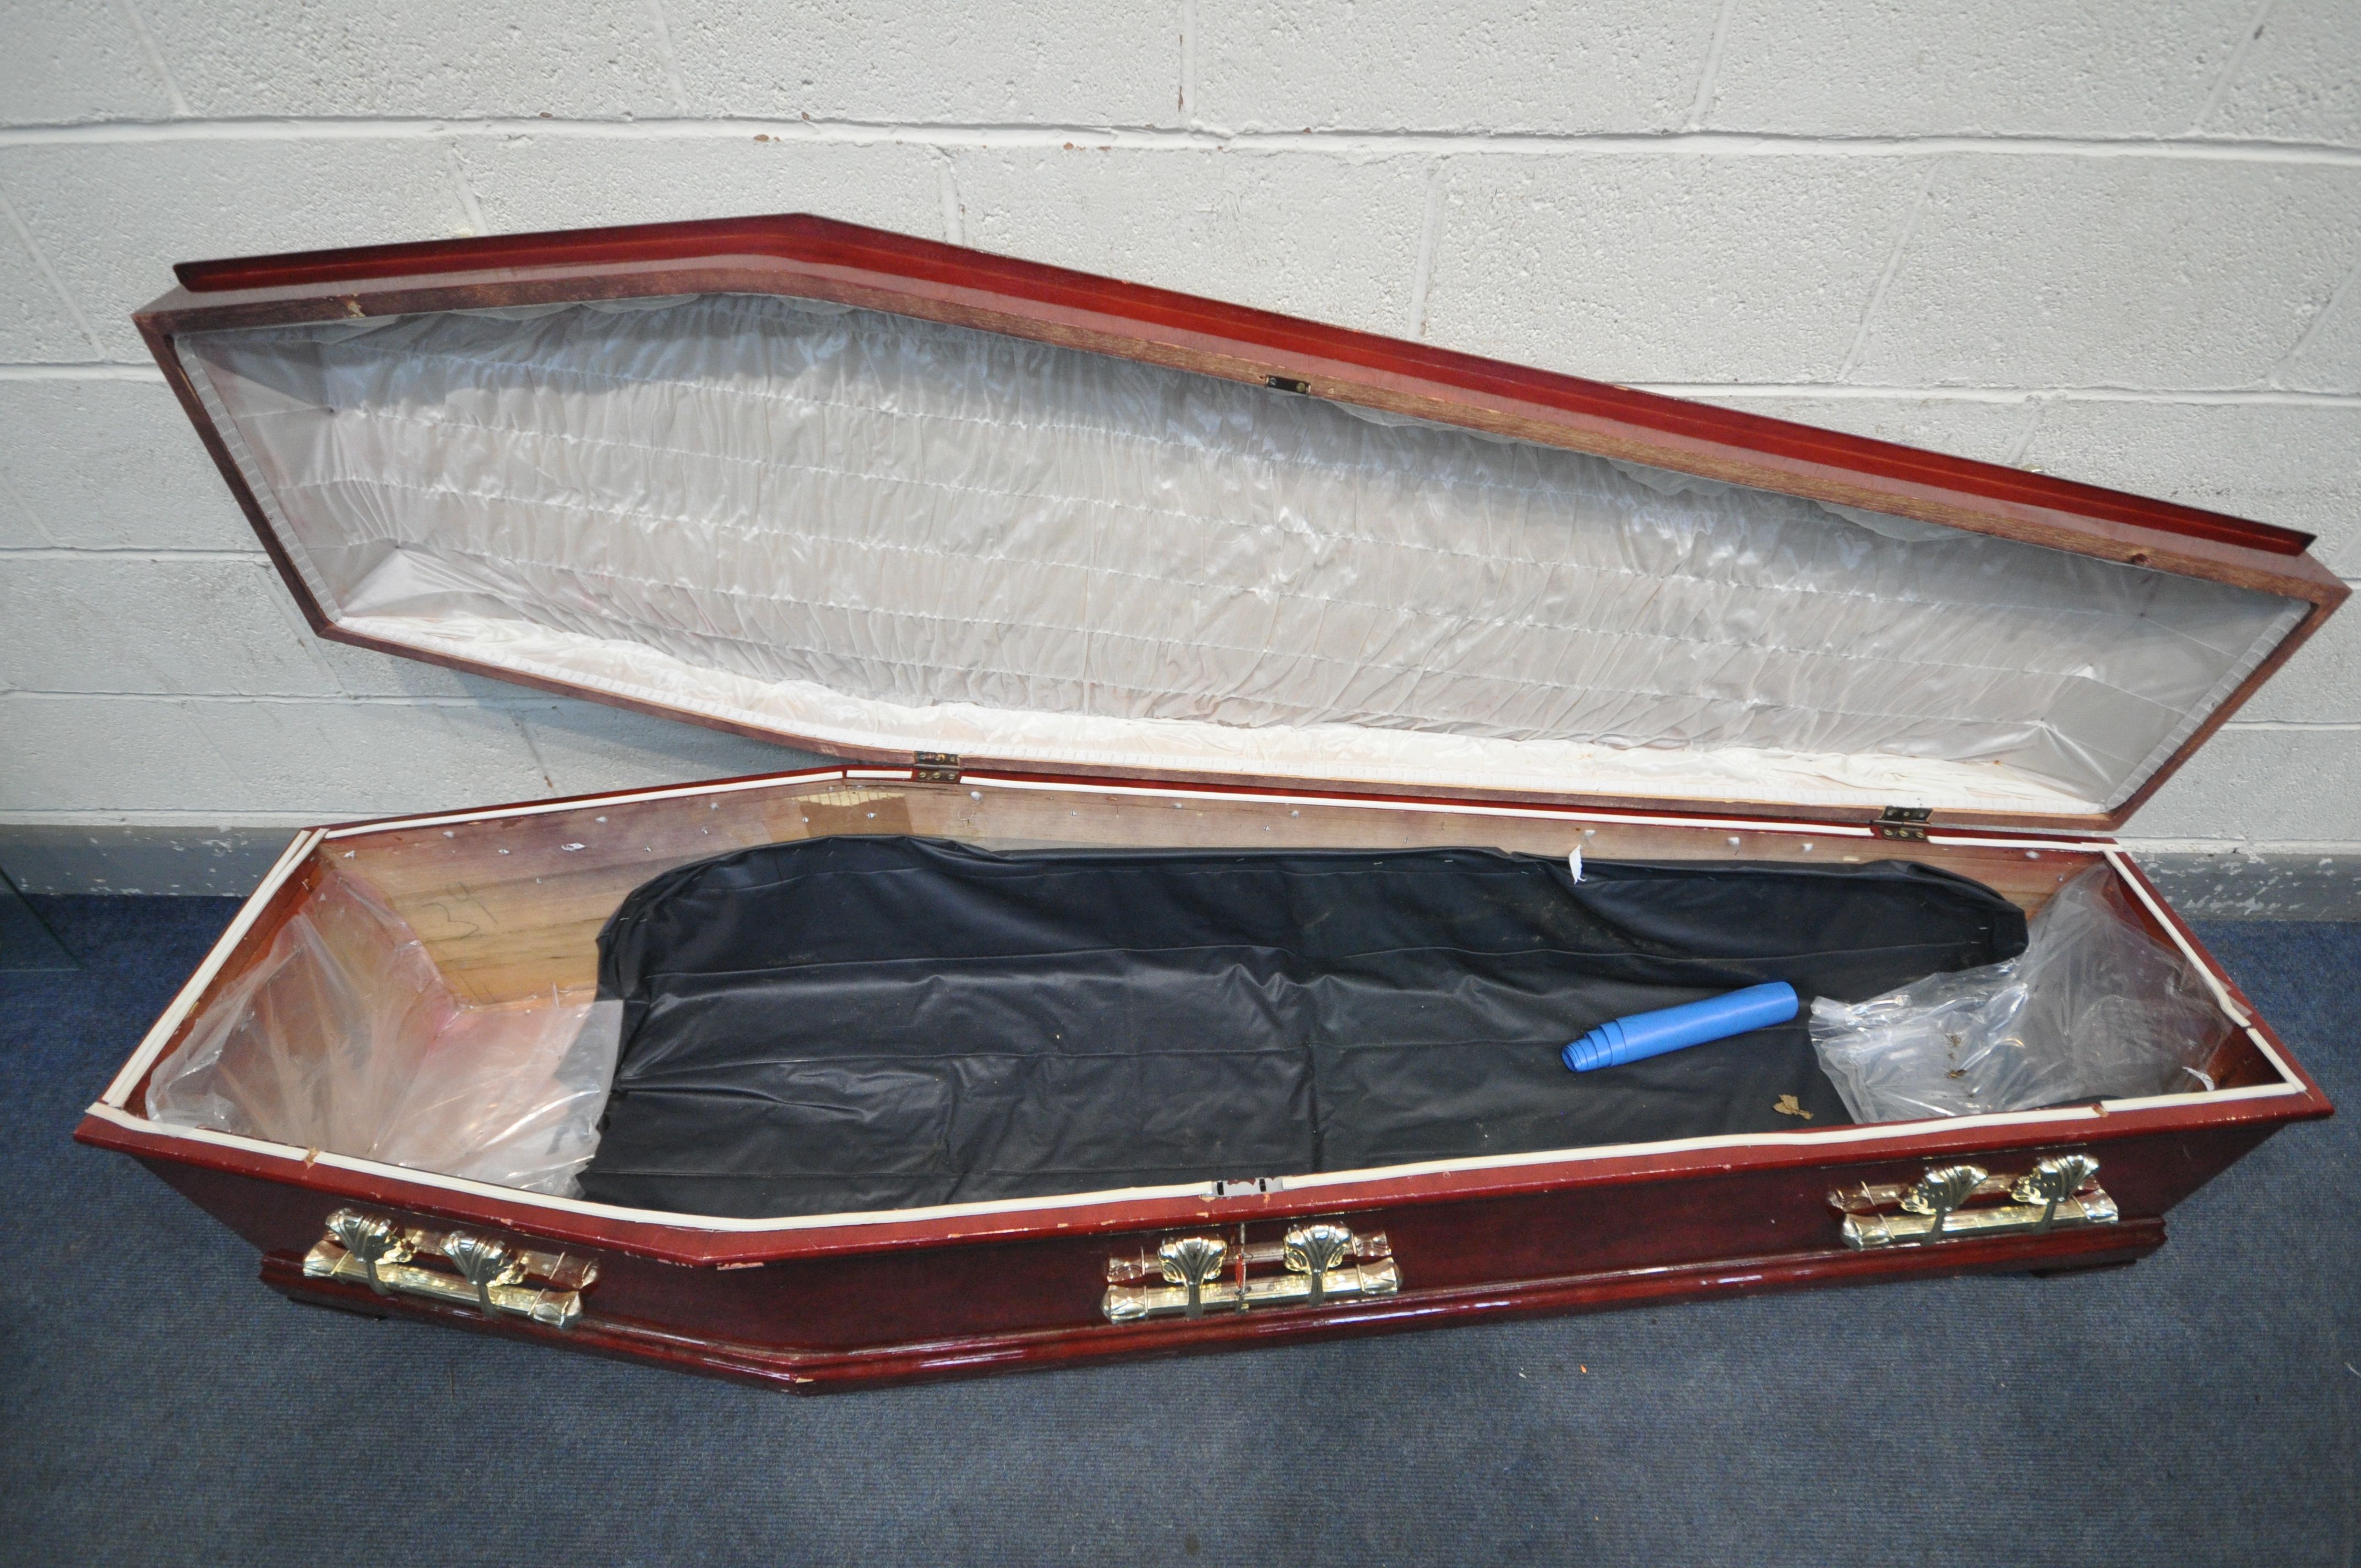 A BESPOKE COFFIN, with a glossy red finish, plastic finials and handles, length 211cm x depth 62cm x - Image 4 of 6